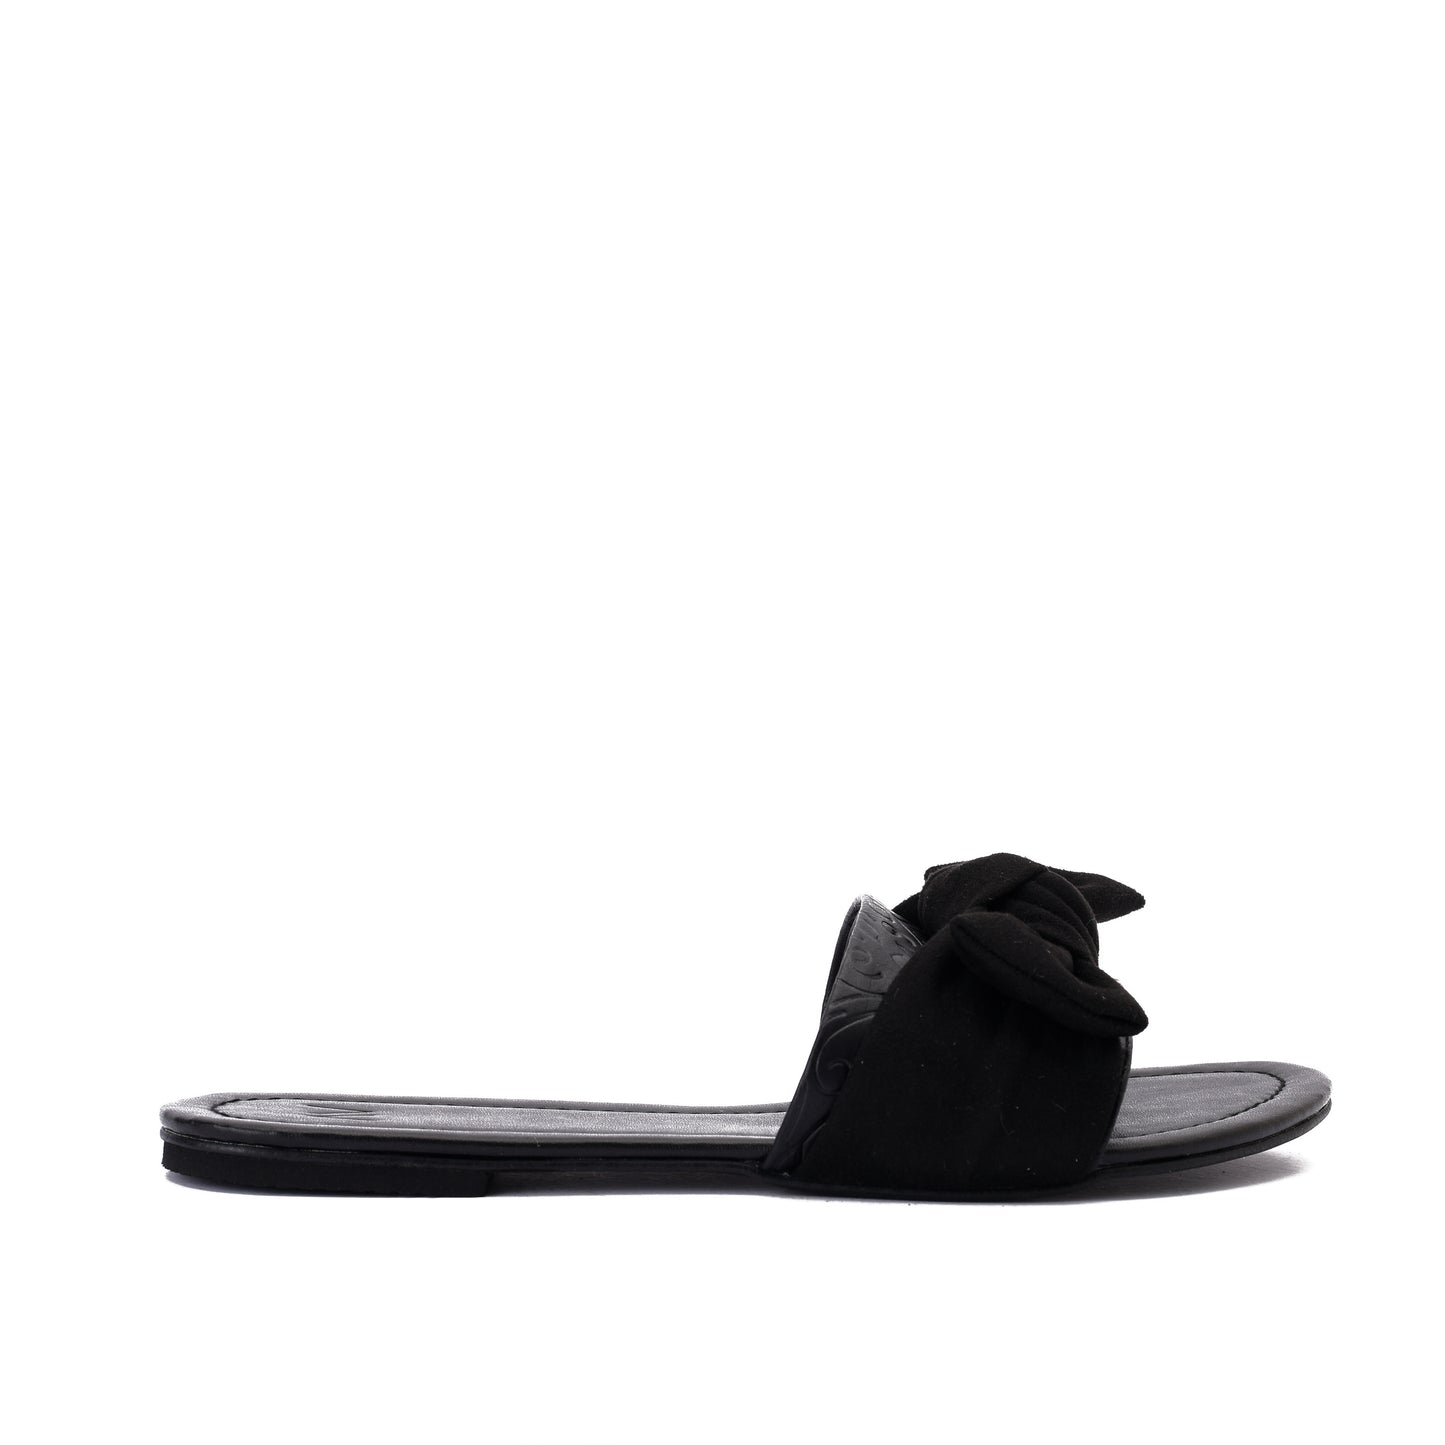 Bow Black Slippers -Code 6009